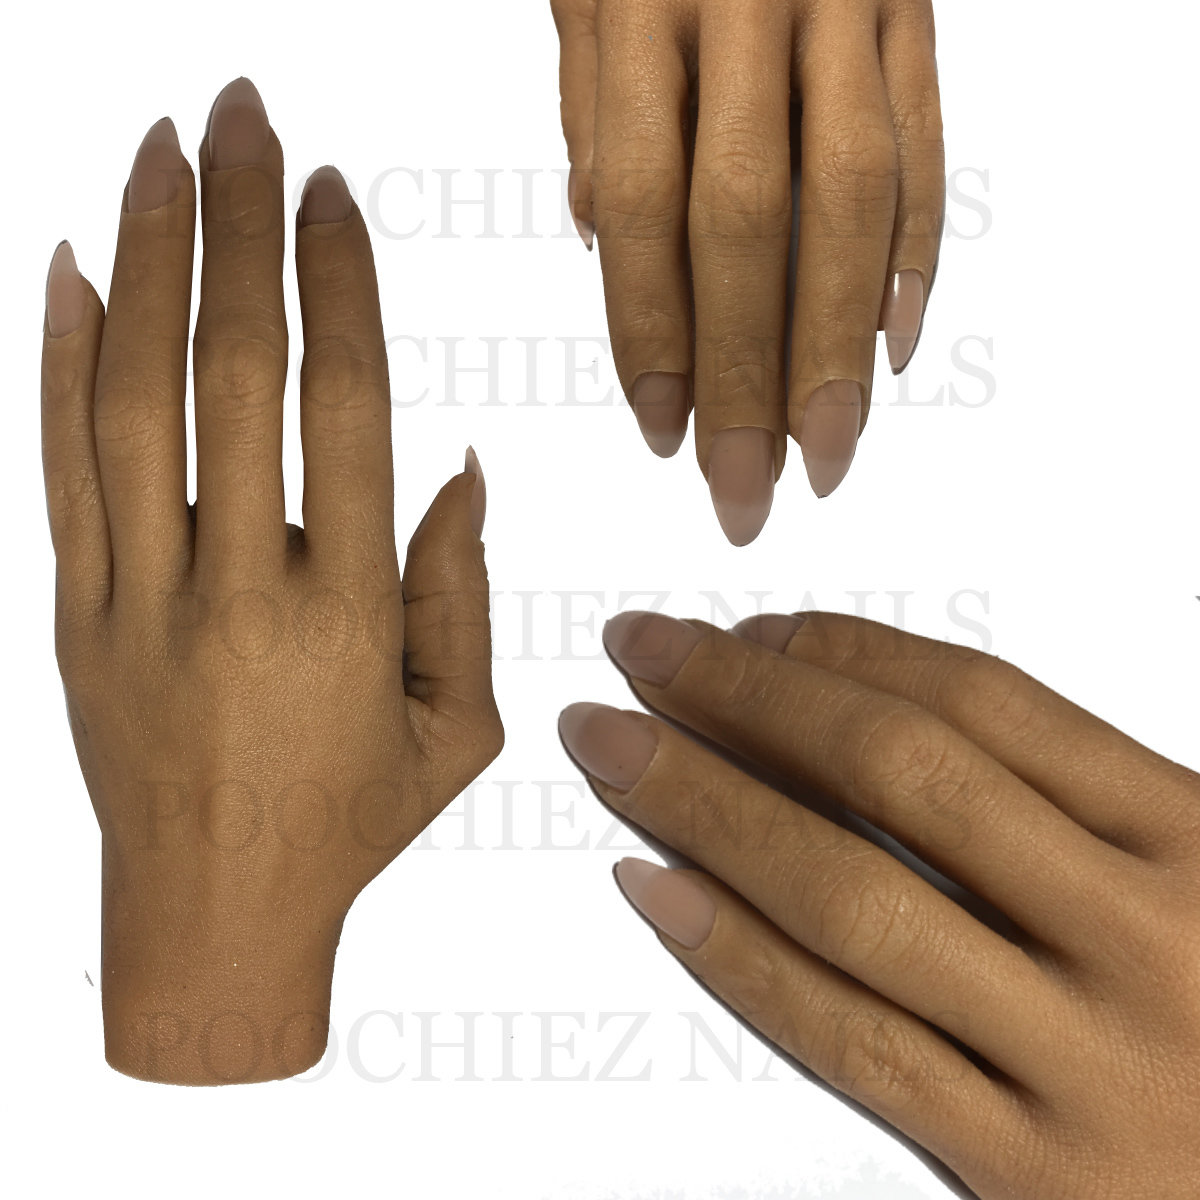 (H0) BELLA REALISTIC FULL PRACTICE HAND ( PLEASE READ THE DIRECTIONS & WATCH THE VIDEOS BELOW) WILL TAKE 5-8 DAYS TO PROCESS.